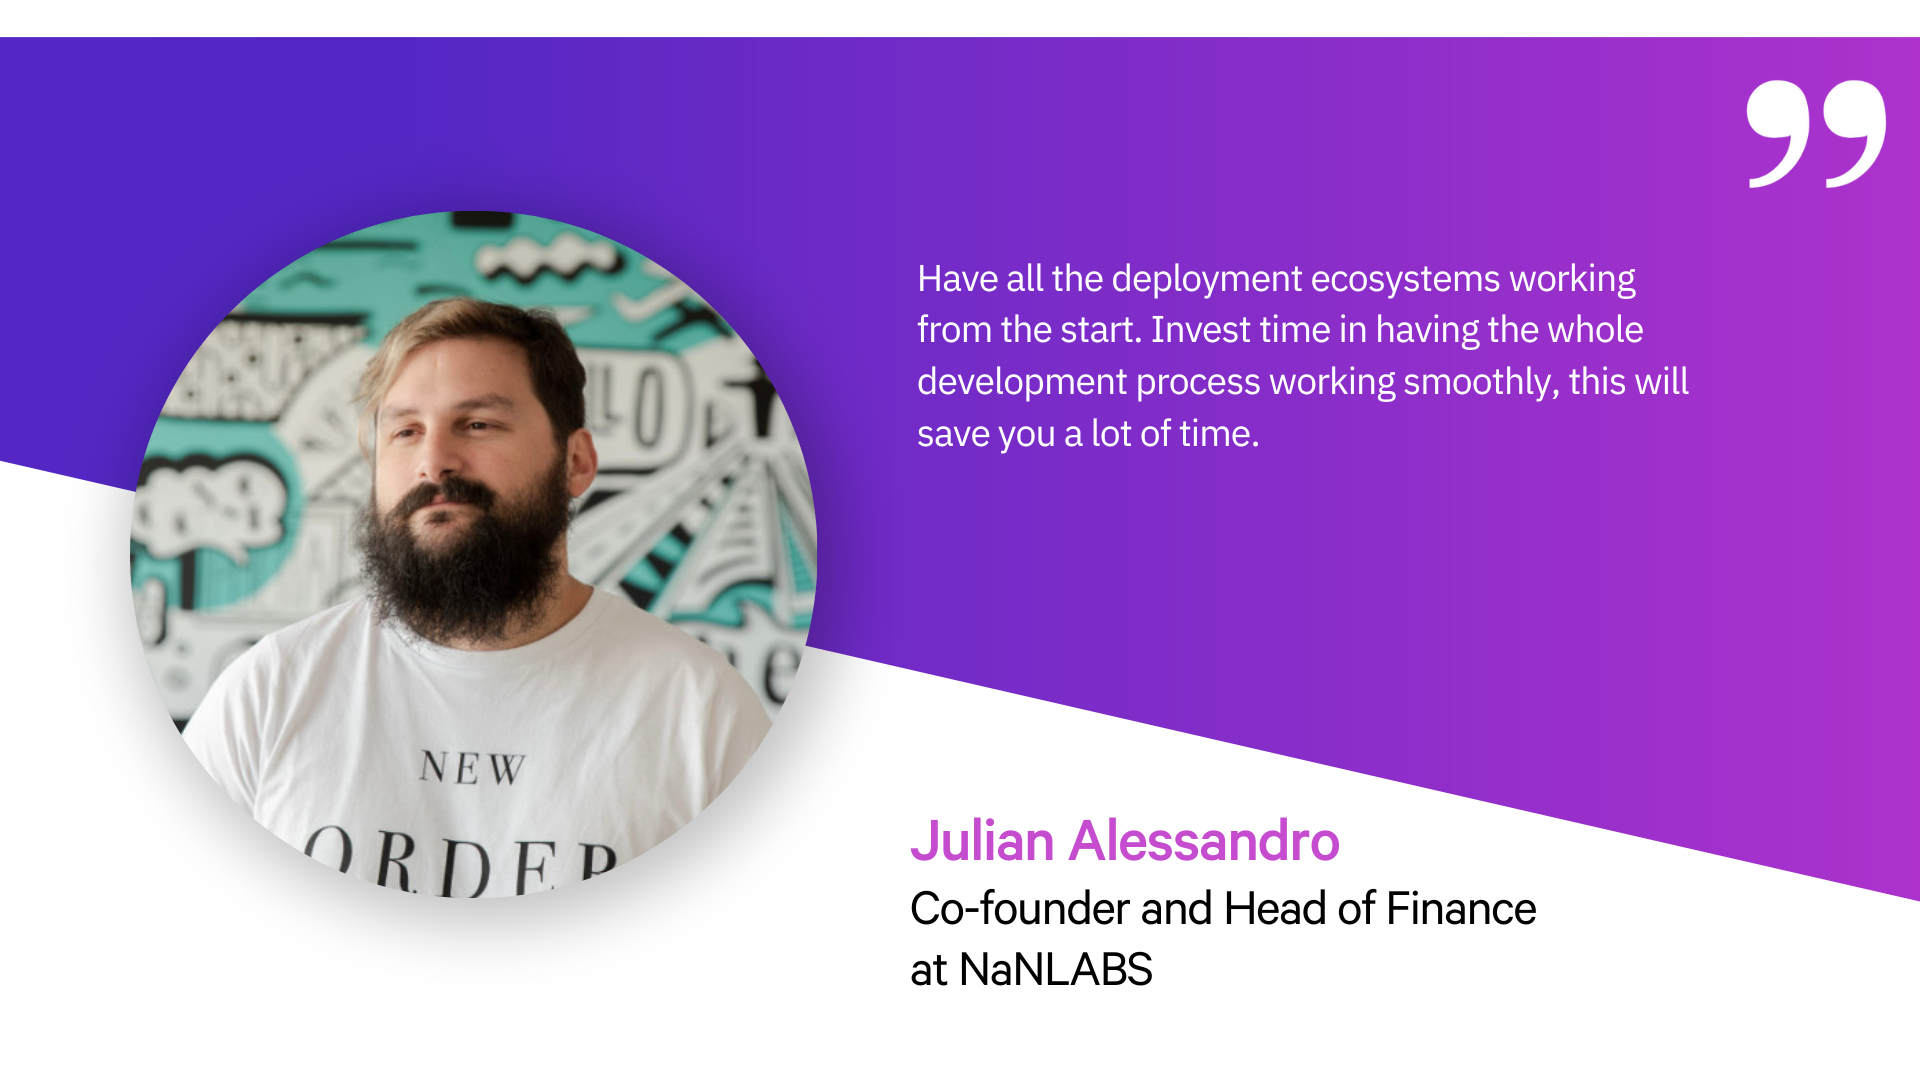 A quote about deployment ecosystems from Julian Alessandro, Co-Founder and Head of Finance at NaNLABS.